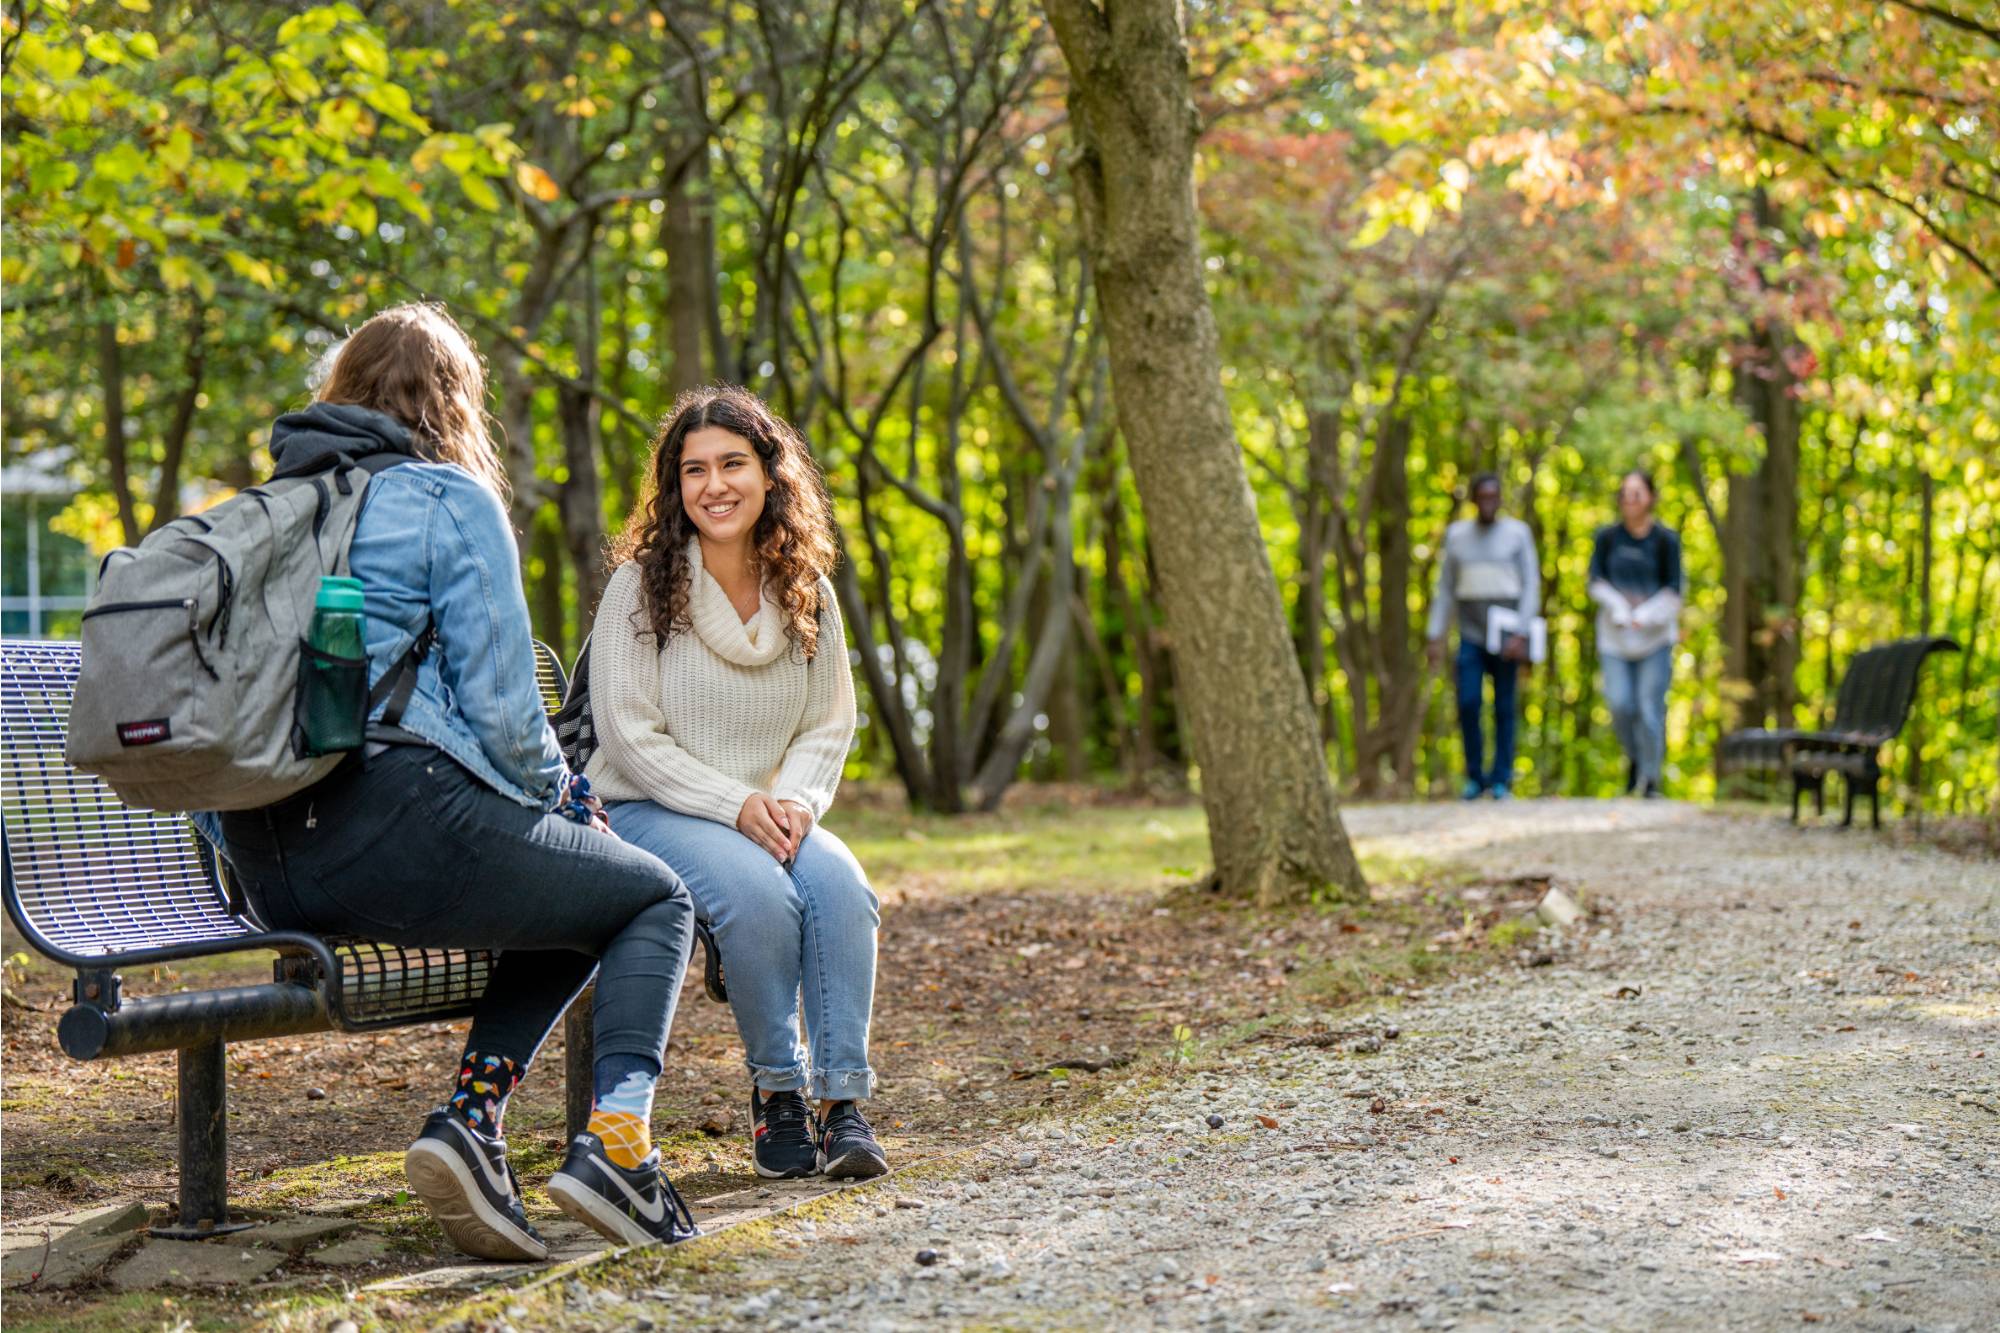 Students in a park sitting on a bench talking with people walking in the background